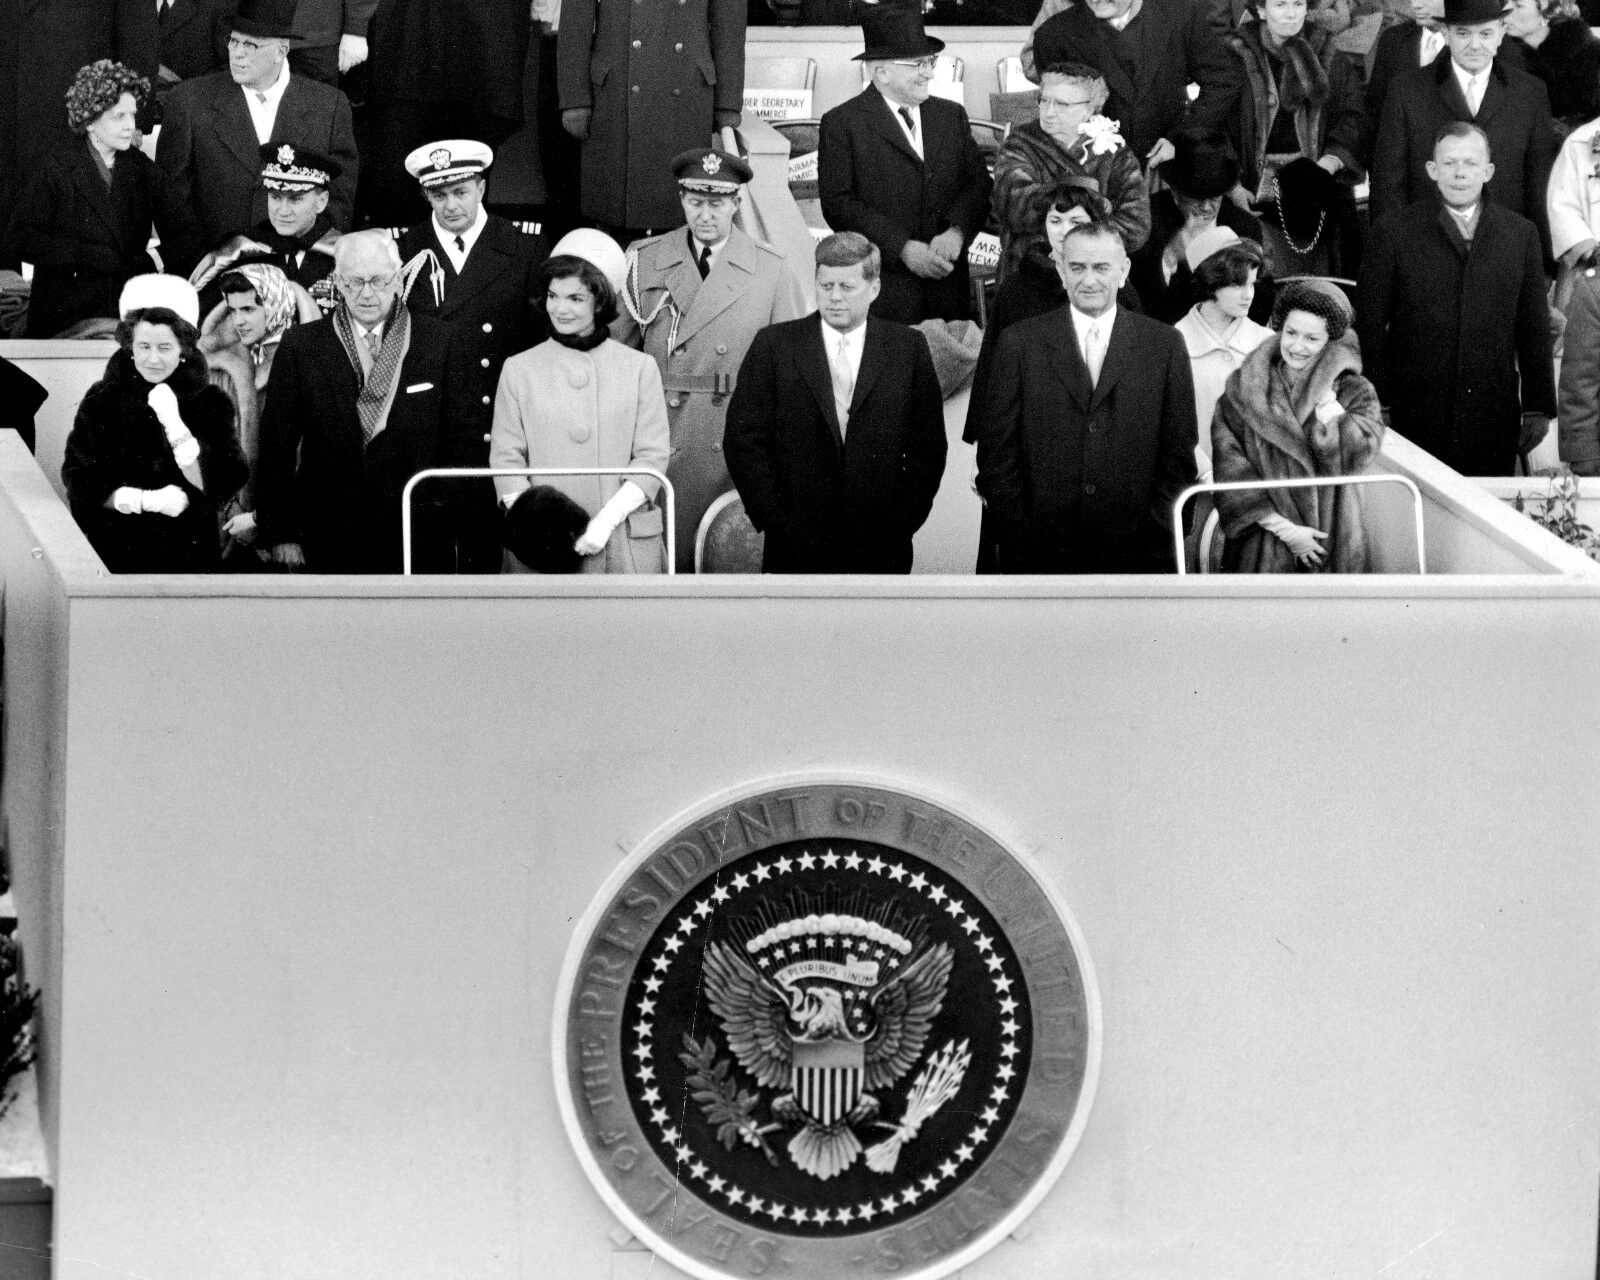 JOHN F. KENNEDY ON PLATFORM FOR HIS INAUGURATION IN 1961 - 8X10 PHOTO (ZZ-809)